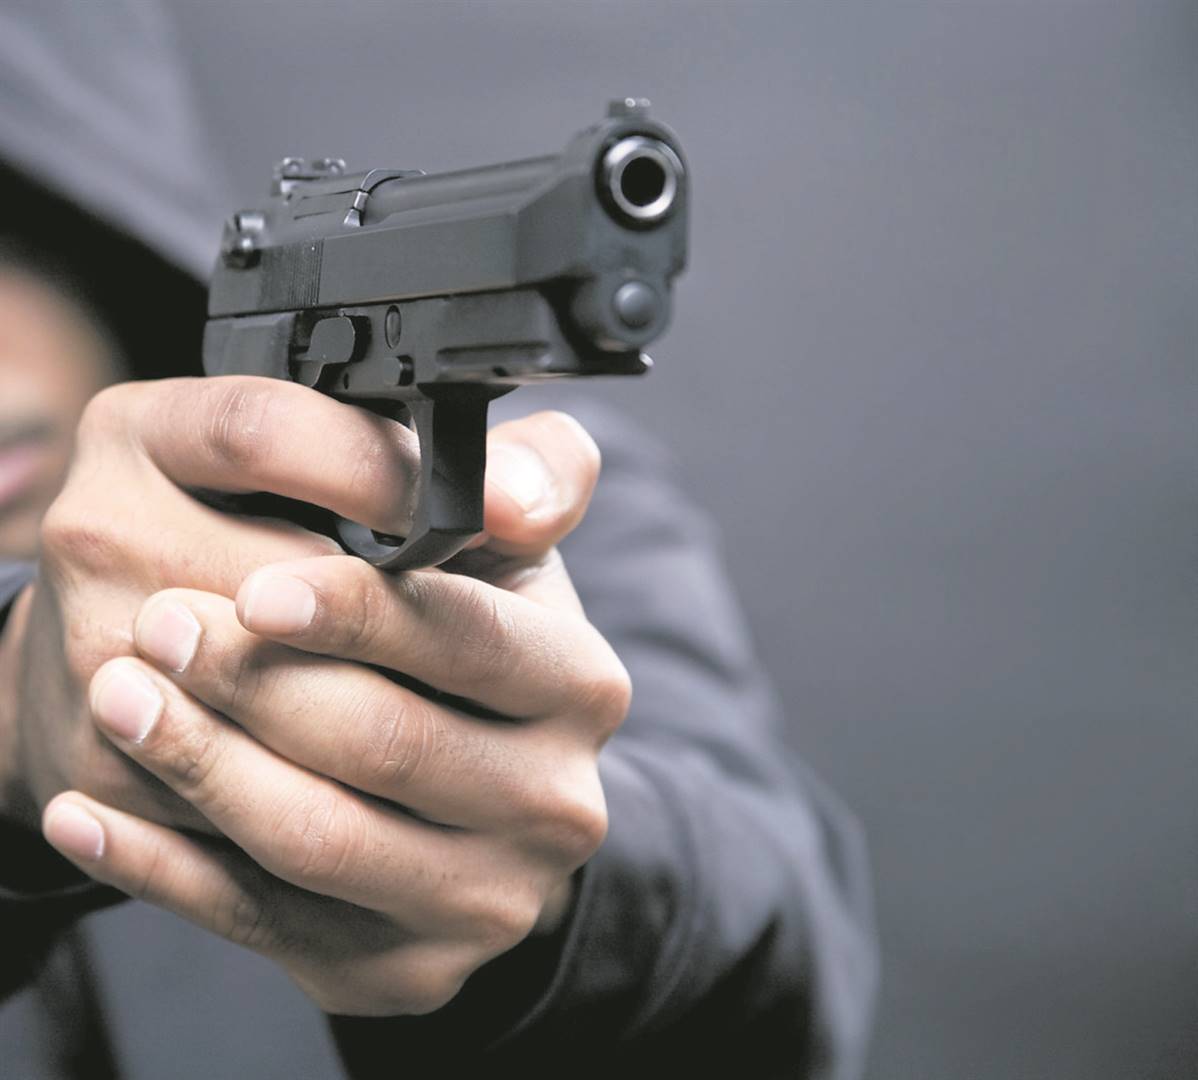 A family from Piet Ratief has been gunned down. 